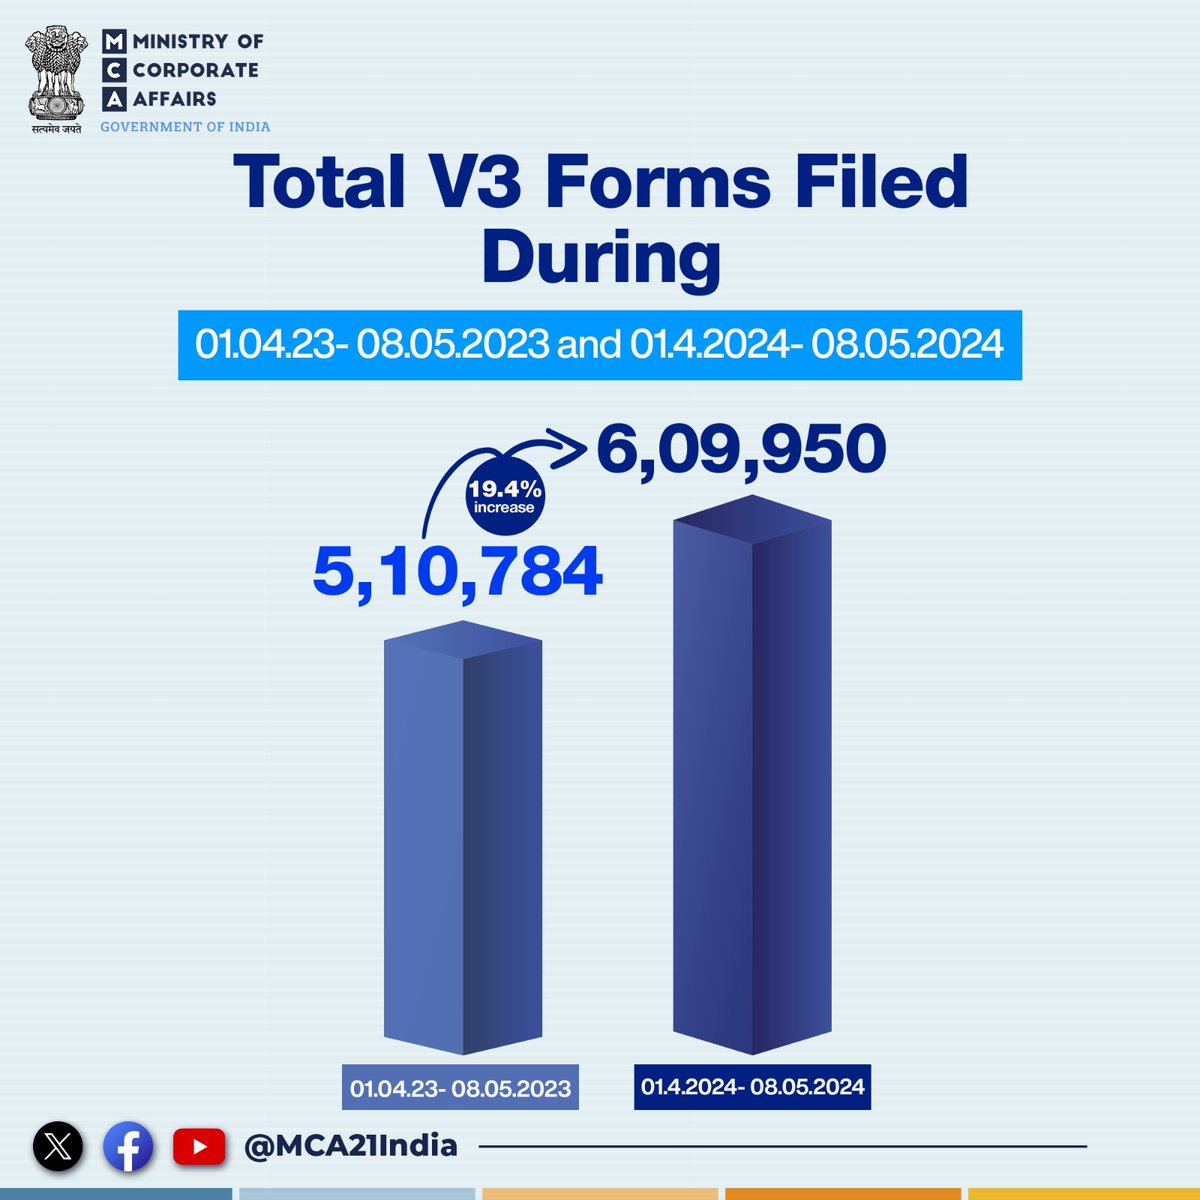 Stakeholders are informed that 6,09,950 V3 forms have been filed during 01.4.2024- 08.05.2024, compared to 5,10,784 during 01.04.23- 08.05.2023. 

#MCA #MCA21 #EaseOfDoingBusiness #V3Forms #Filing